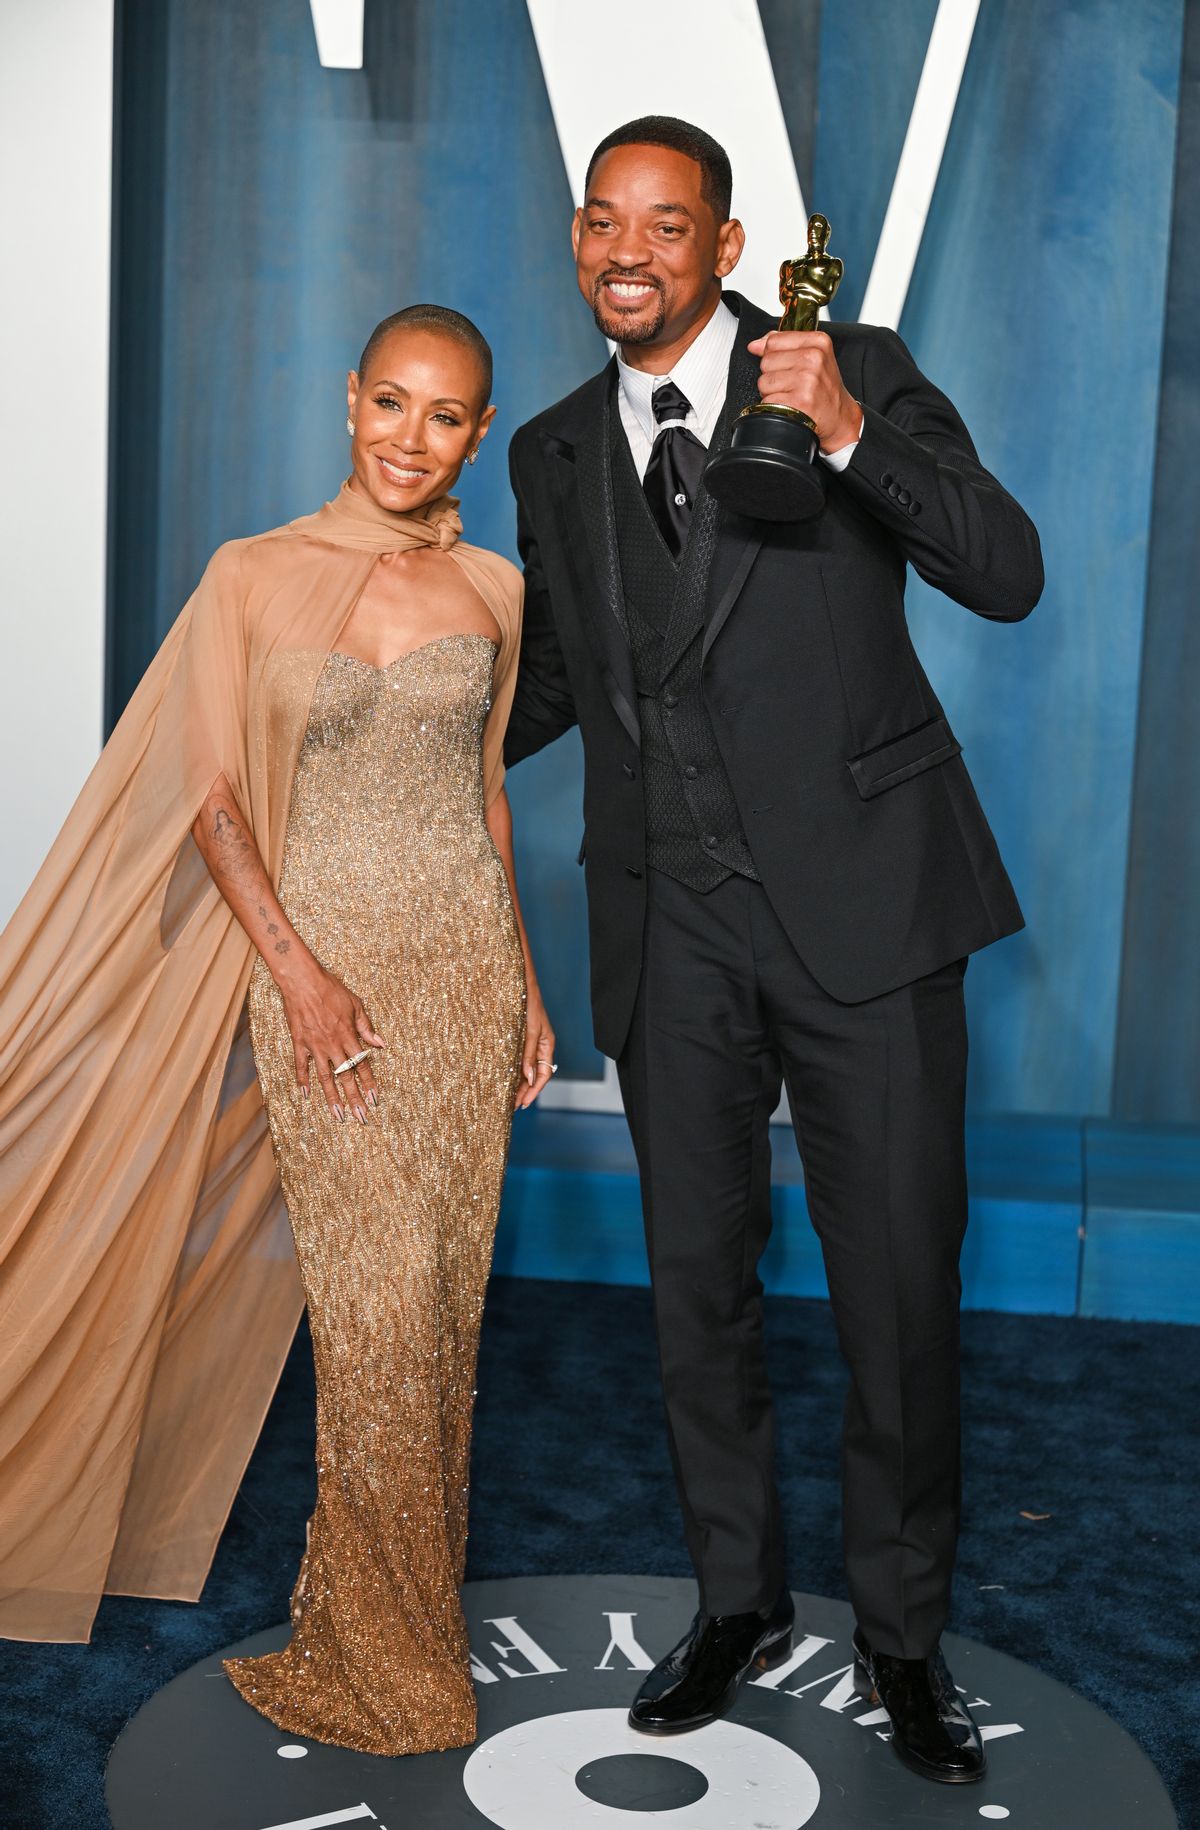 BEVERLY HILLS, CALIFORNIA - MARCH 27: Jada Pinkett Smith and Will Smith attend the 2022 Vanity Fair Oscar Party Hosted By Radhika Jones at Wallis Annenberg Center for the Performing Arts on March 27, 2022 in Beverly Hills, California. (Photo by Karwai Tang/Getty Images) (Karwai Tang/Getty Images)